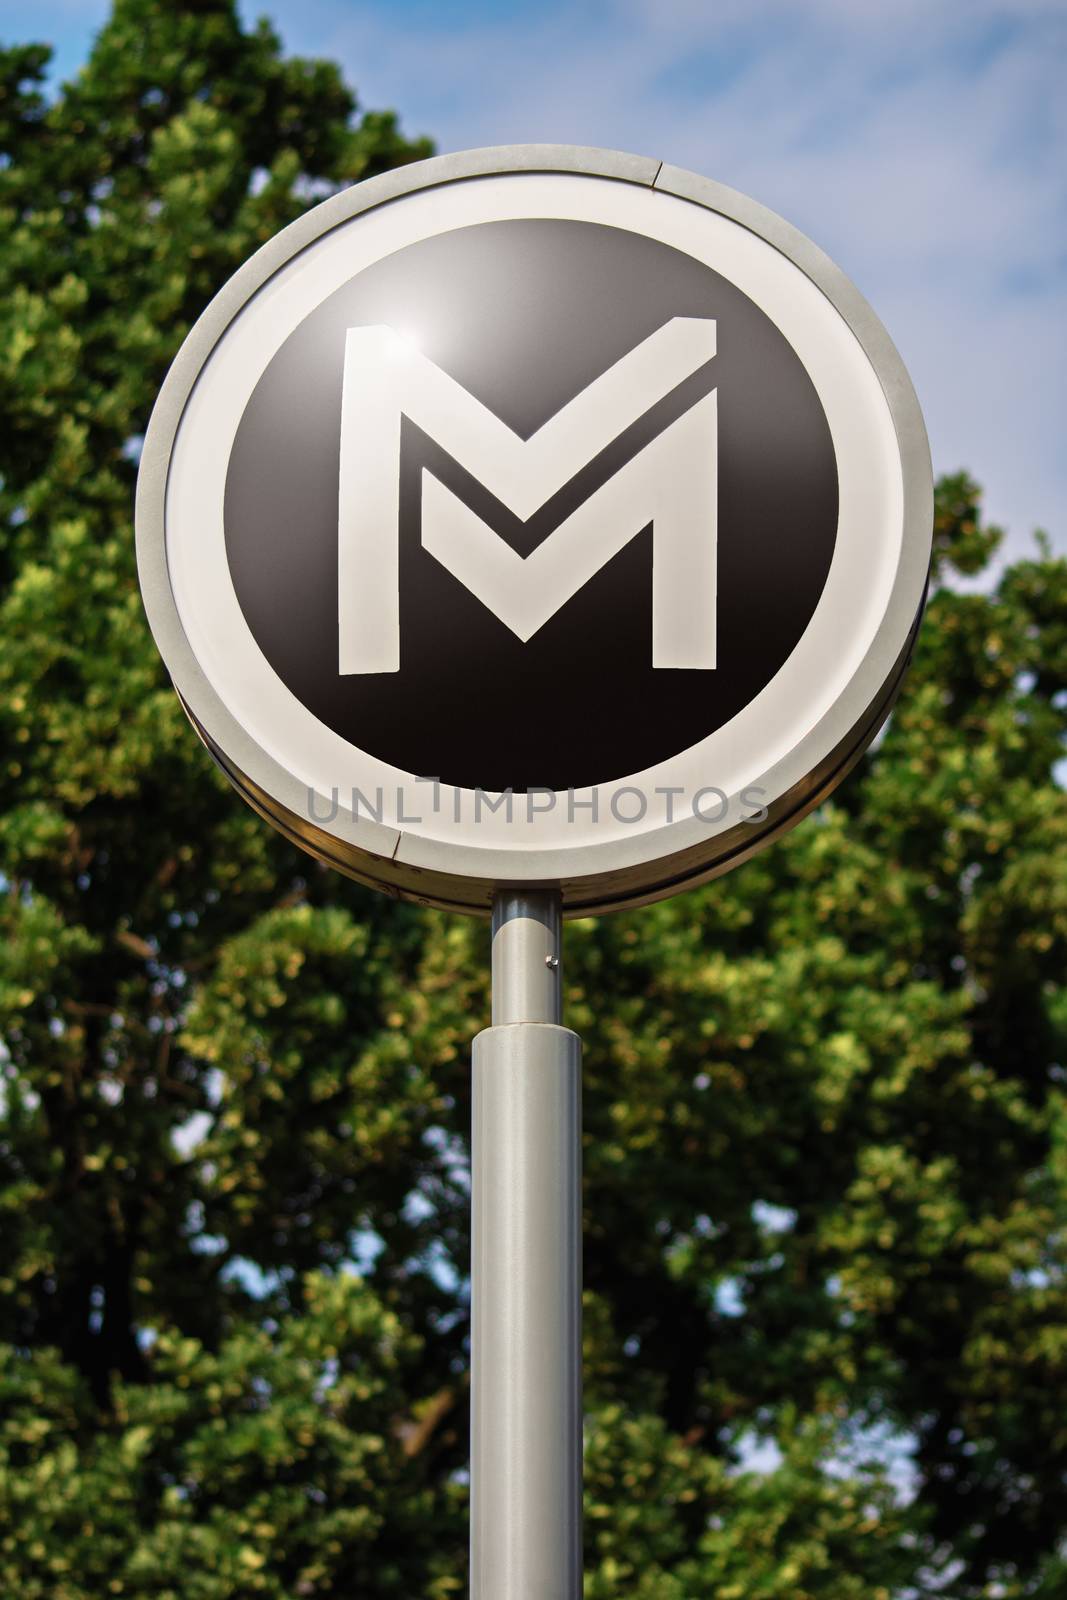 Transportation concept. Sign or symbol of Budapest city metro service located outdoor with trees and sky in the background. Metro sign with trees in the background.